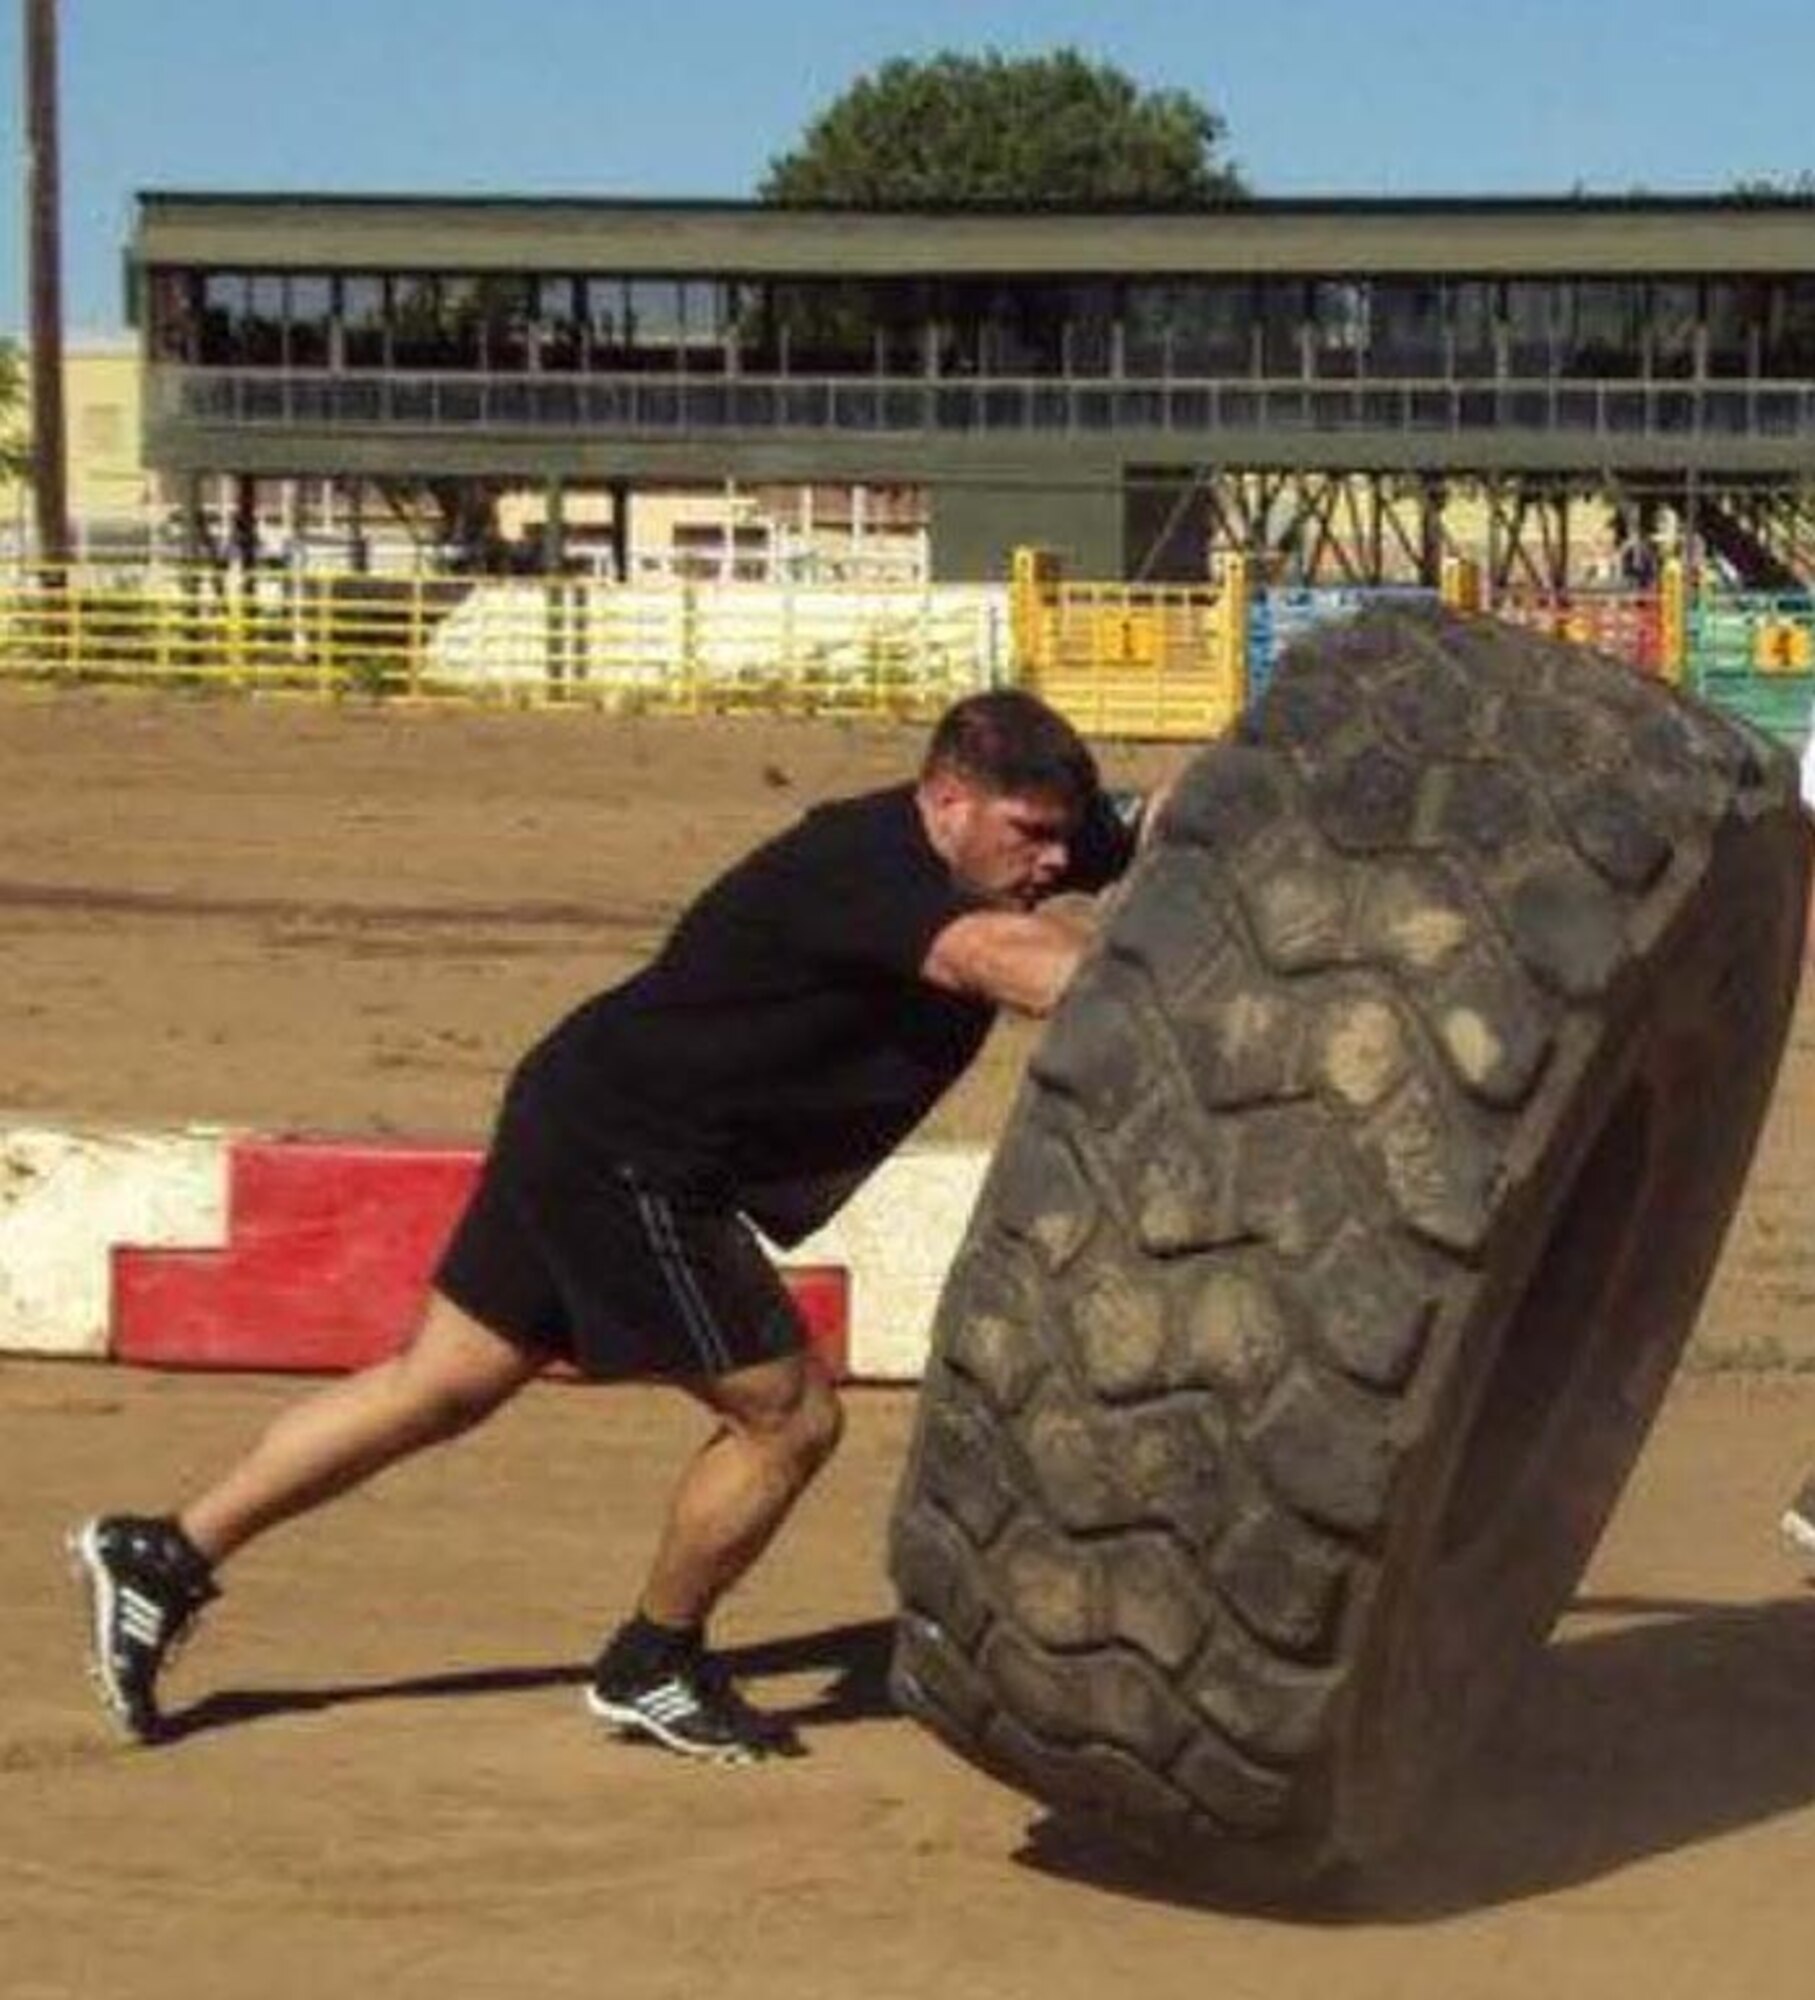 Tech Sgt. Ronald A. Strahan competes in the tire flip event at the Heritage Day Festival in Red Bluff, Calif. July 4. Sergeant Strahan won the individual event and the entire competition to qualify for the national competition in Reno, Nev. in November 2010. (Courtesy Photo)